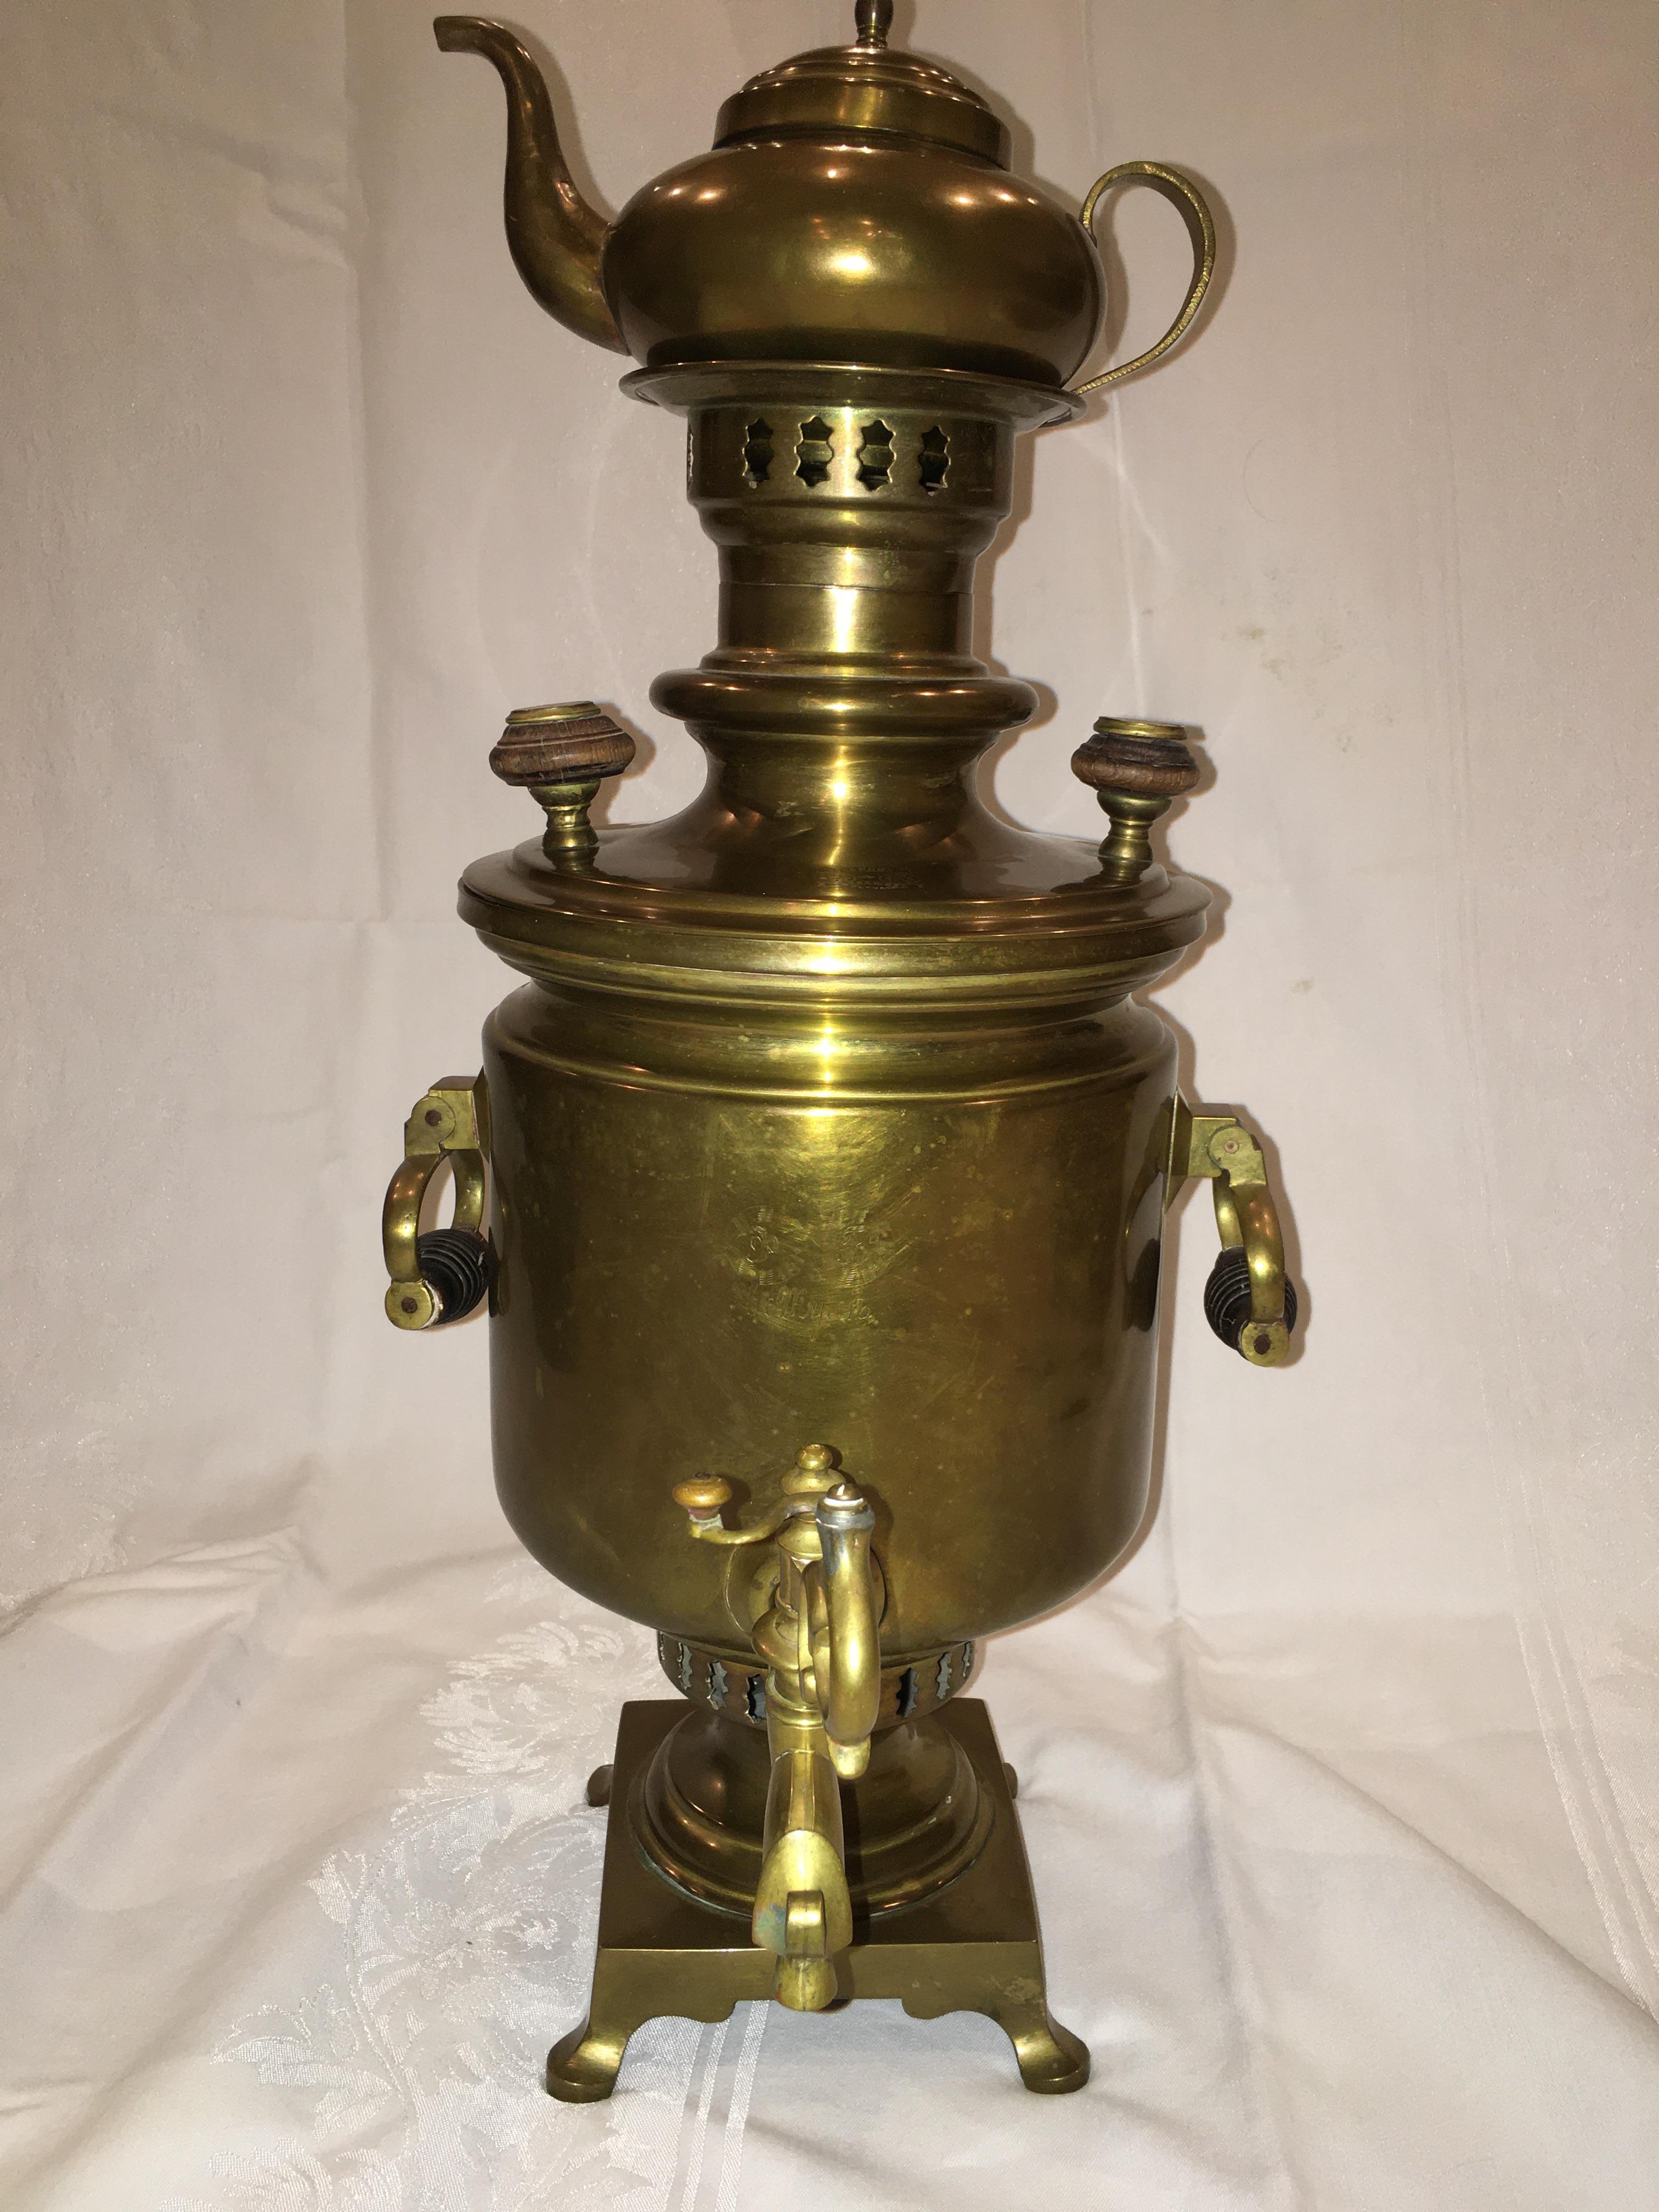 Antique brass and wood Imperial Russian Samovar. Markings stamped on the top above the spout show it was made by the Balashev Factory in Tula, Russia. Hand engraving on the side says “F (factory) B (Balashev), Tula. 

The Samovar consists of a